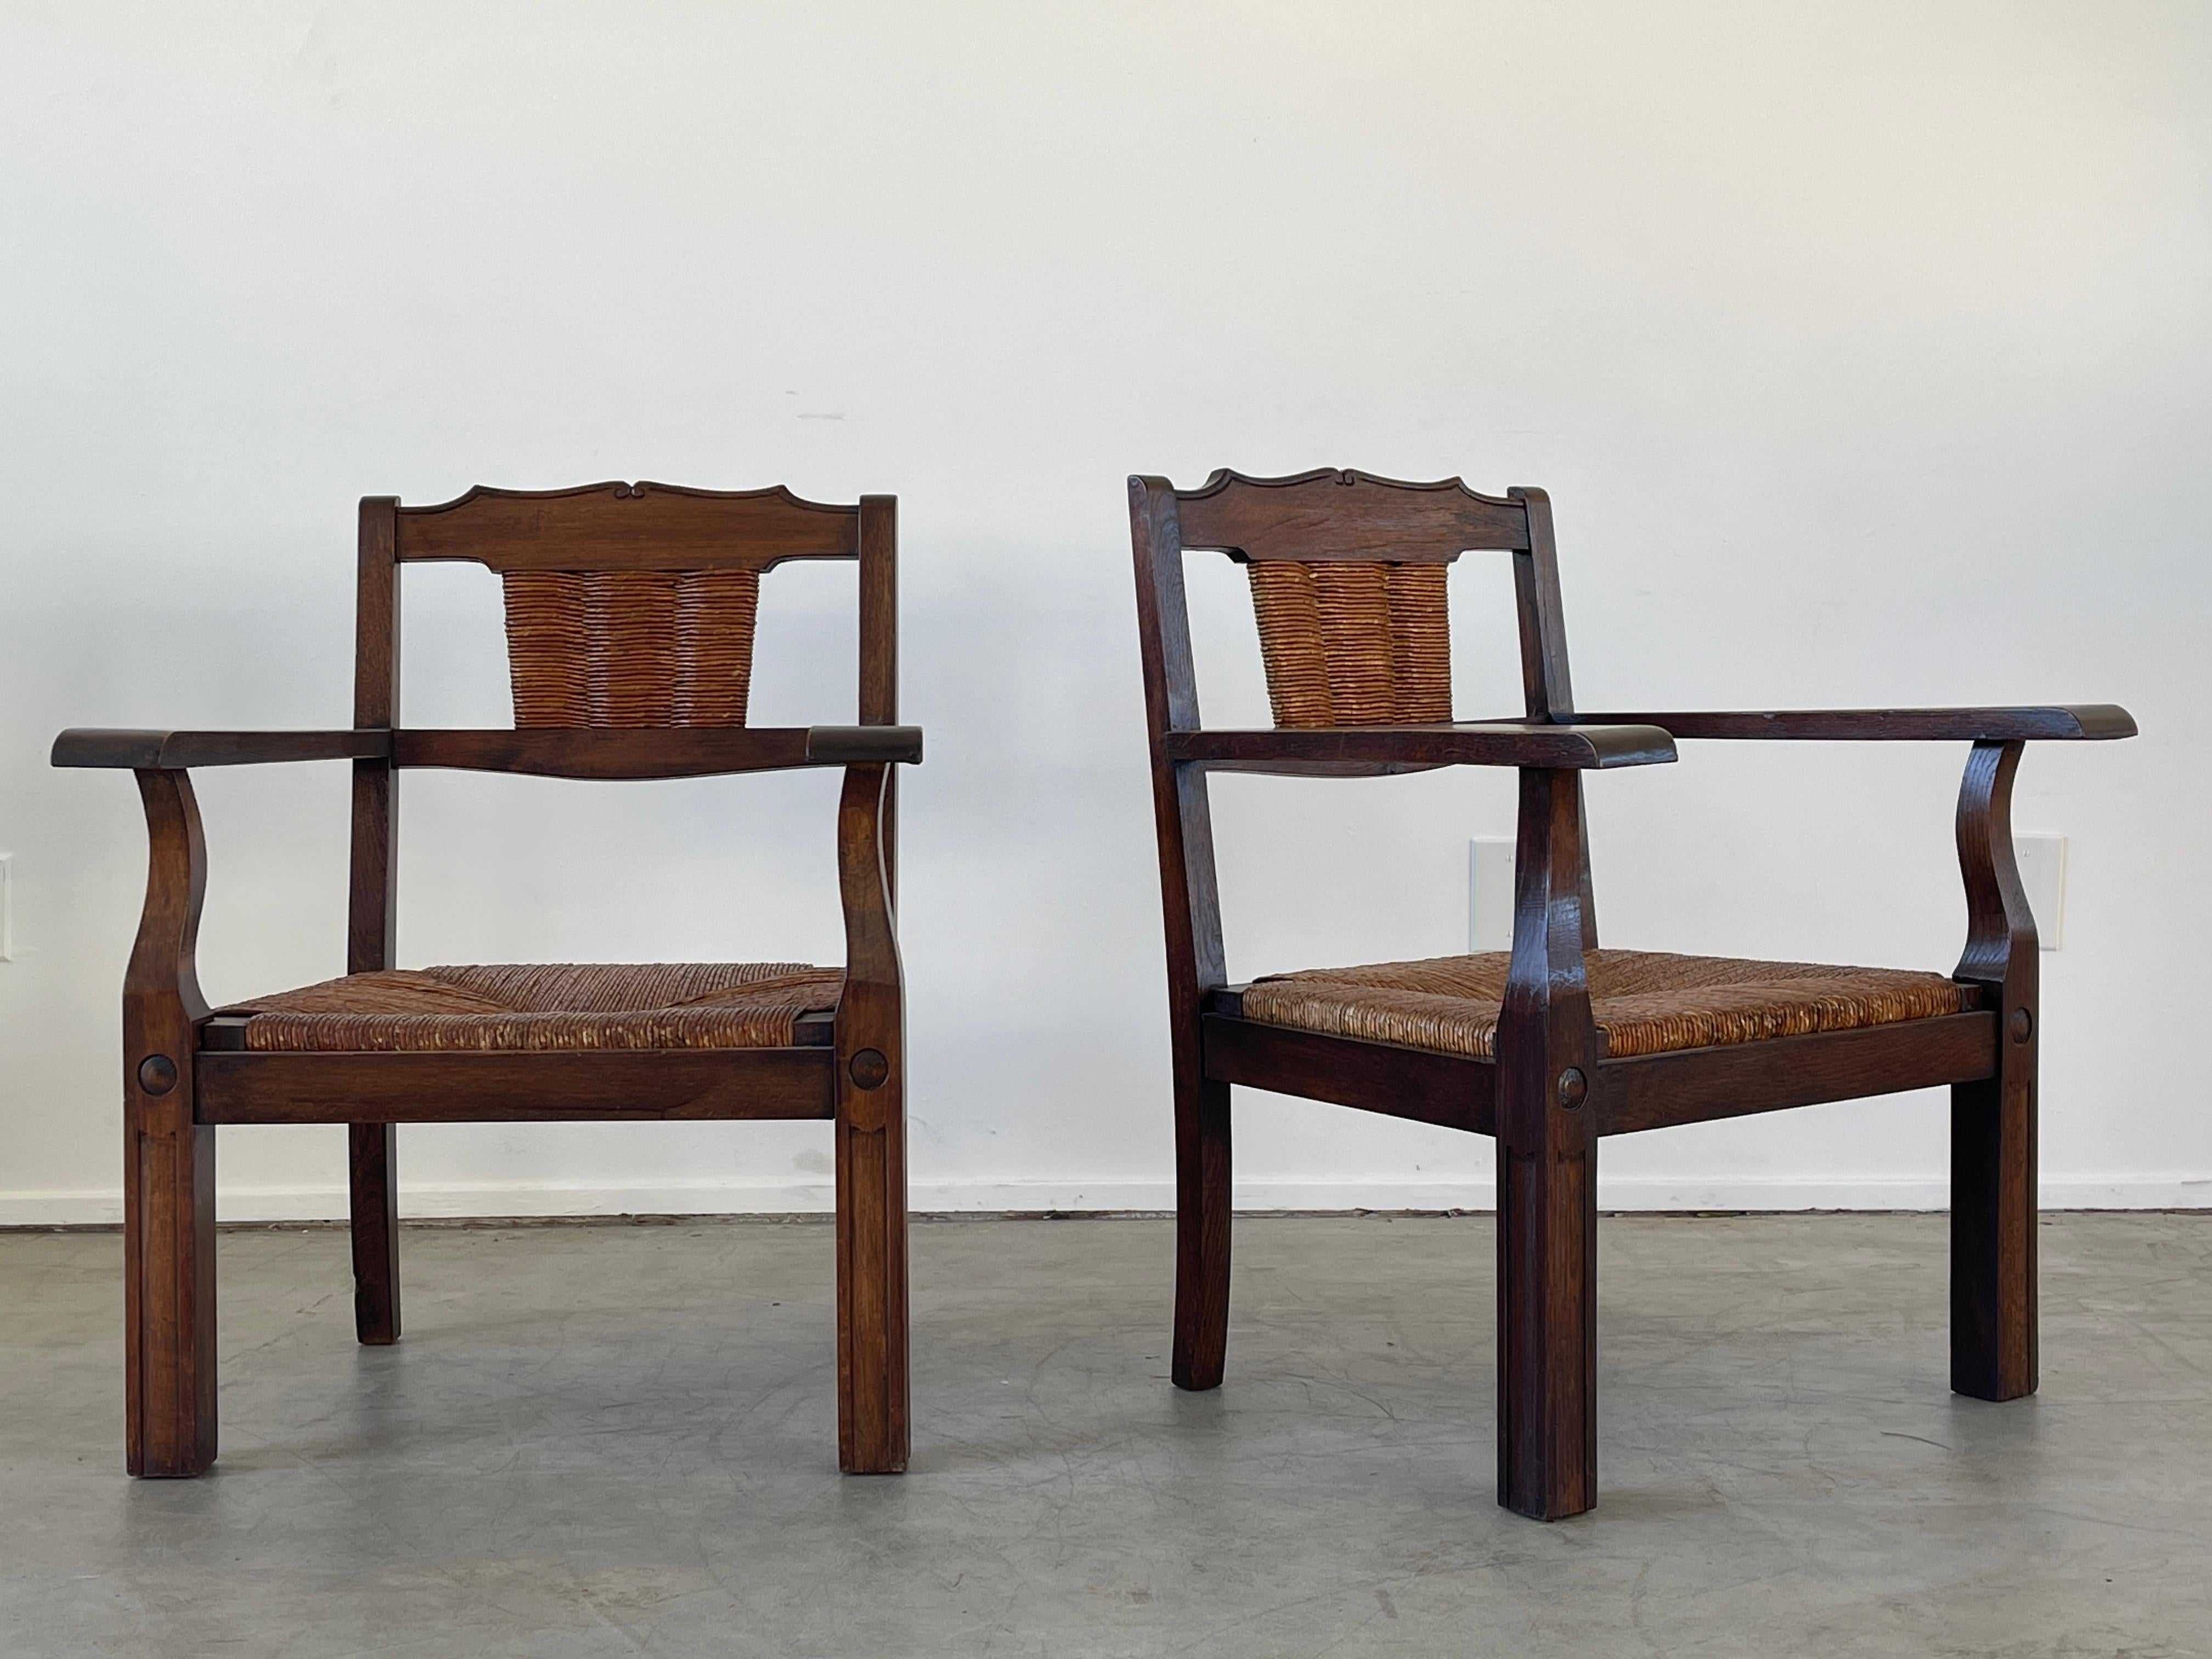 Pair of 1950's French oak and rush chairs in the style of Francis Jourdain with woven seats and backs, curved lines.